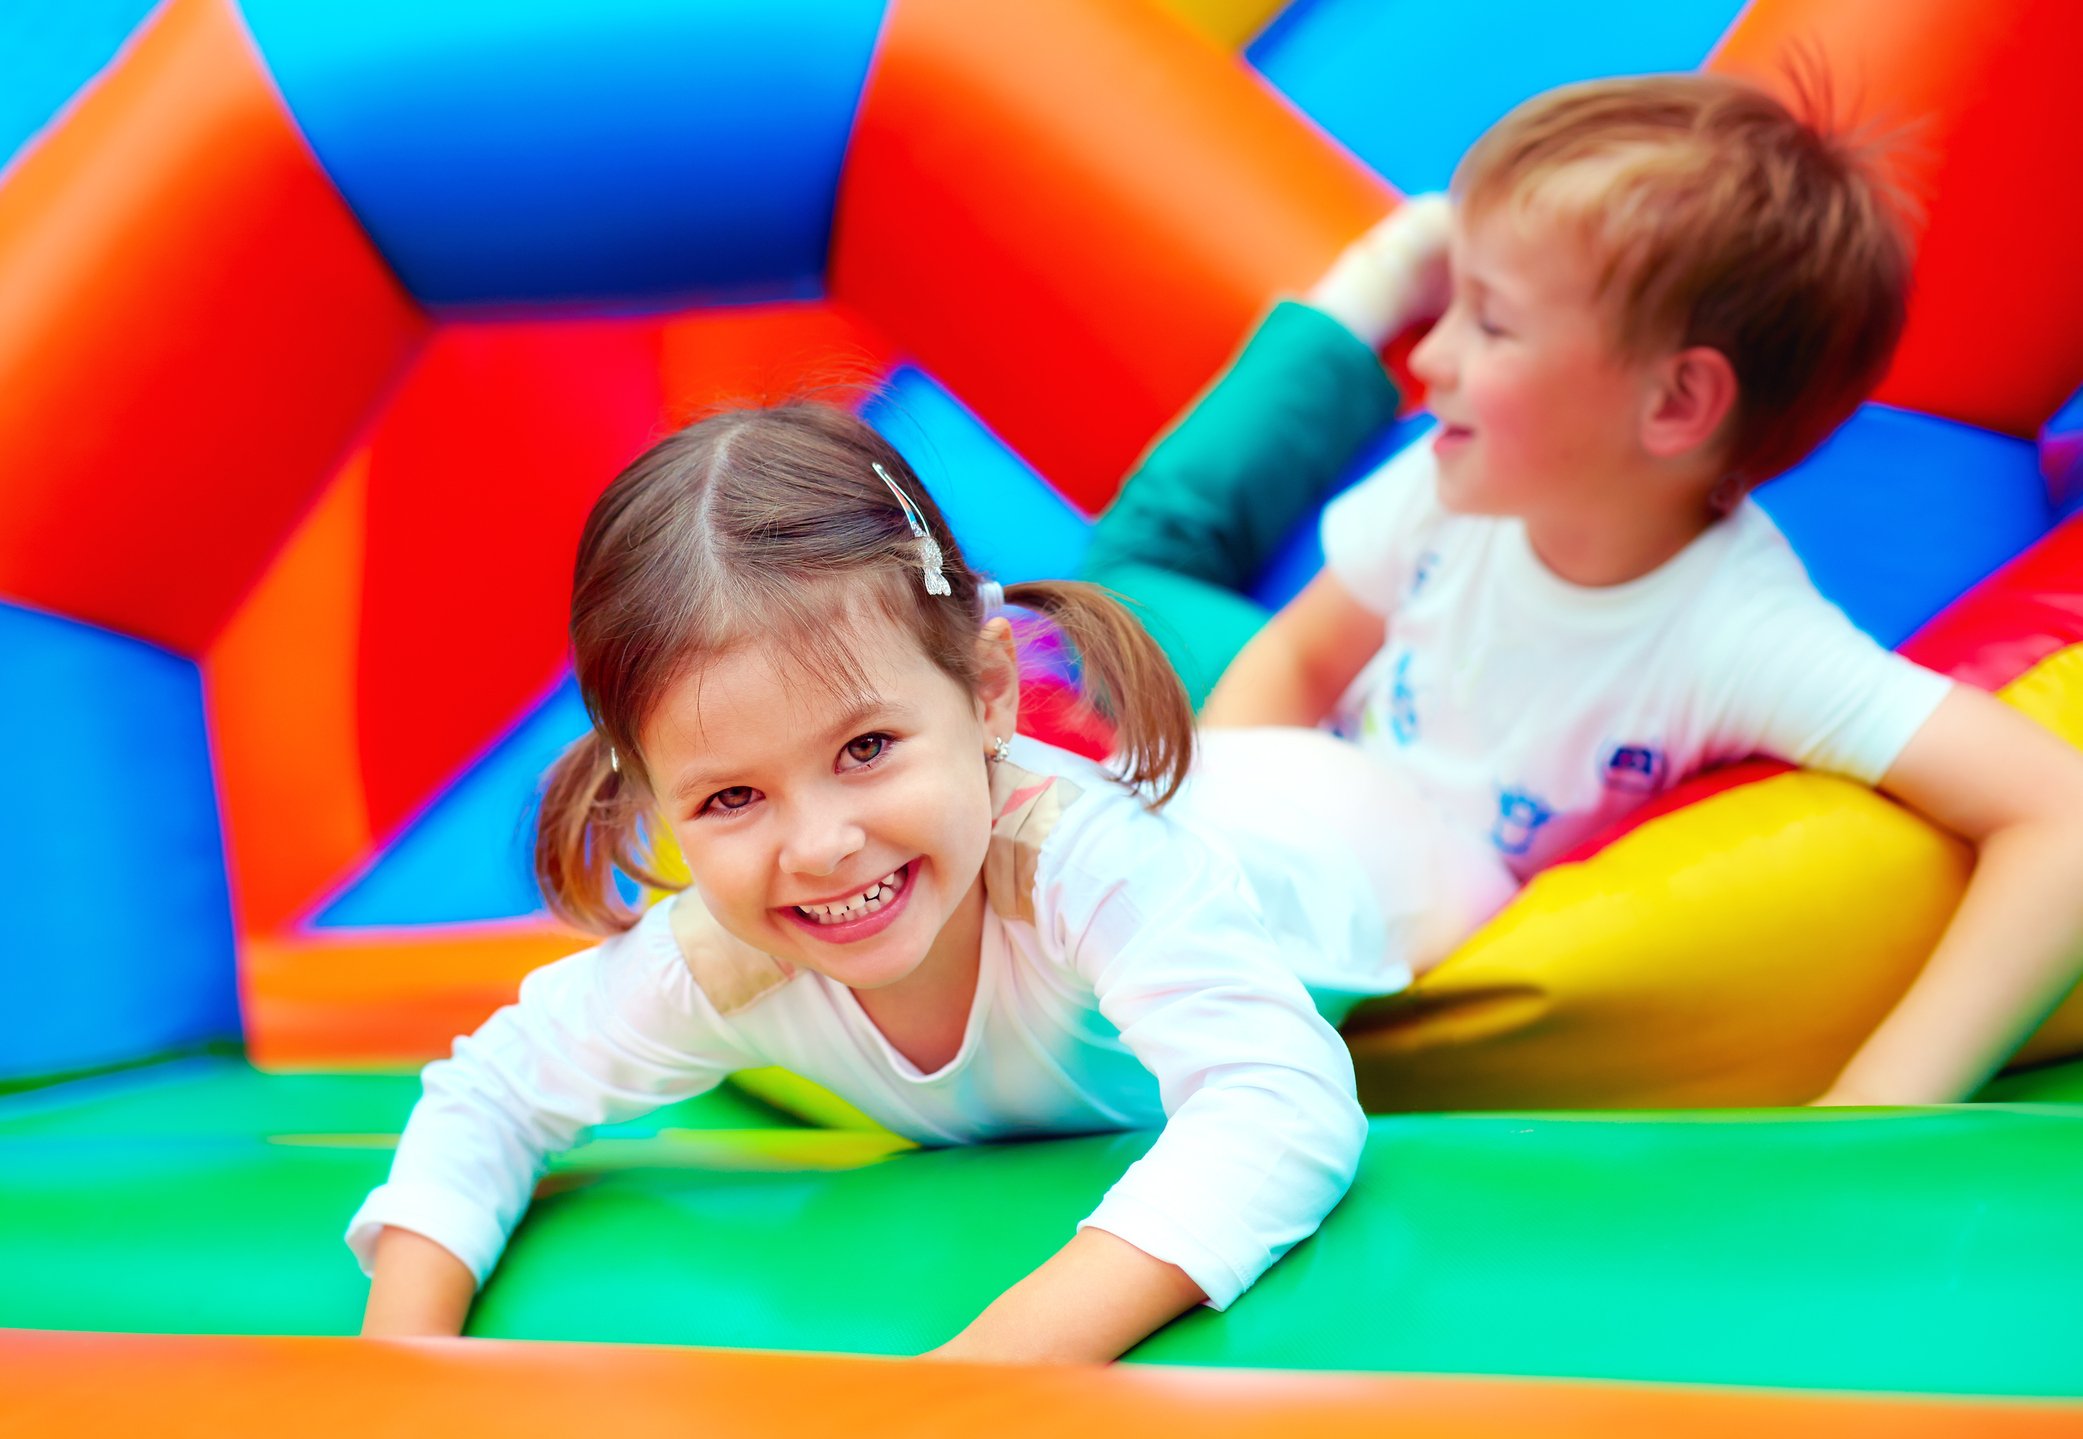 Two children playing in a colourful bouncy castle.